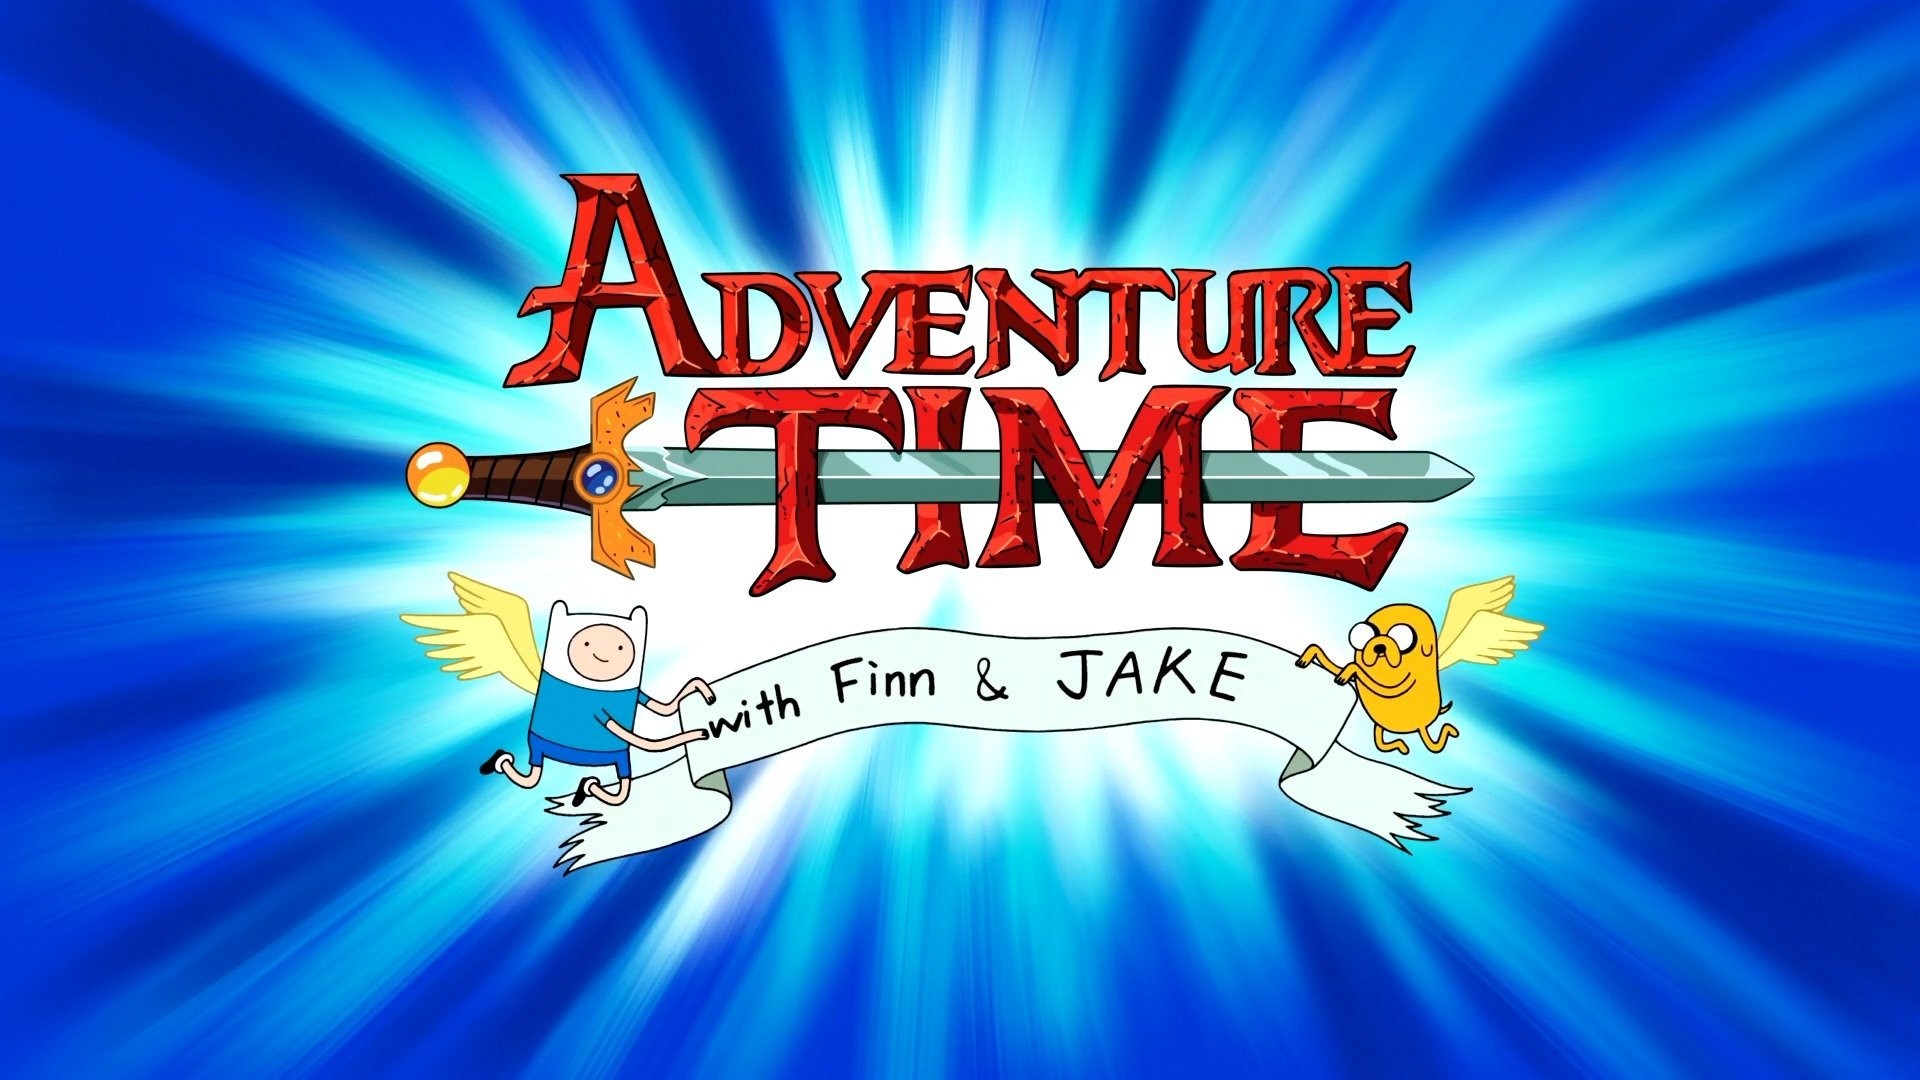 1920x1080 adventure time time adventures saver finn jake with finn and jake sword  wings label .